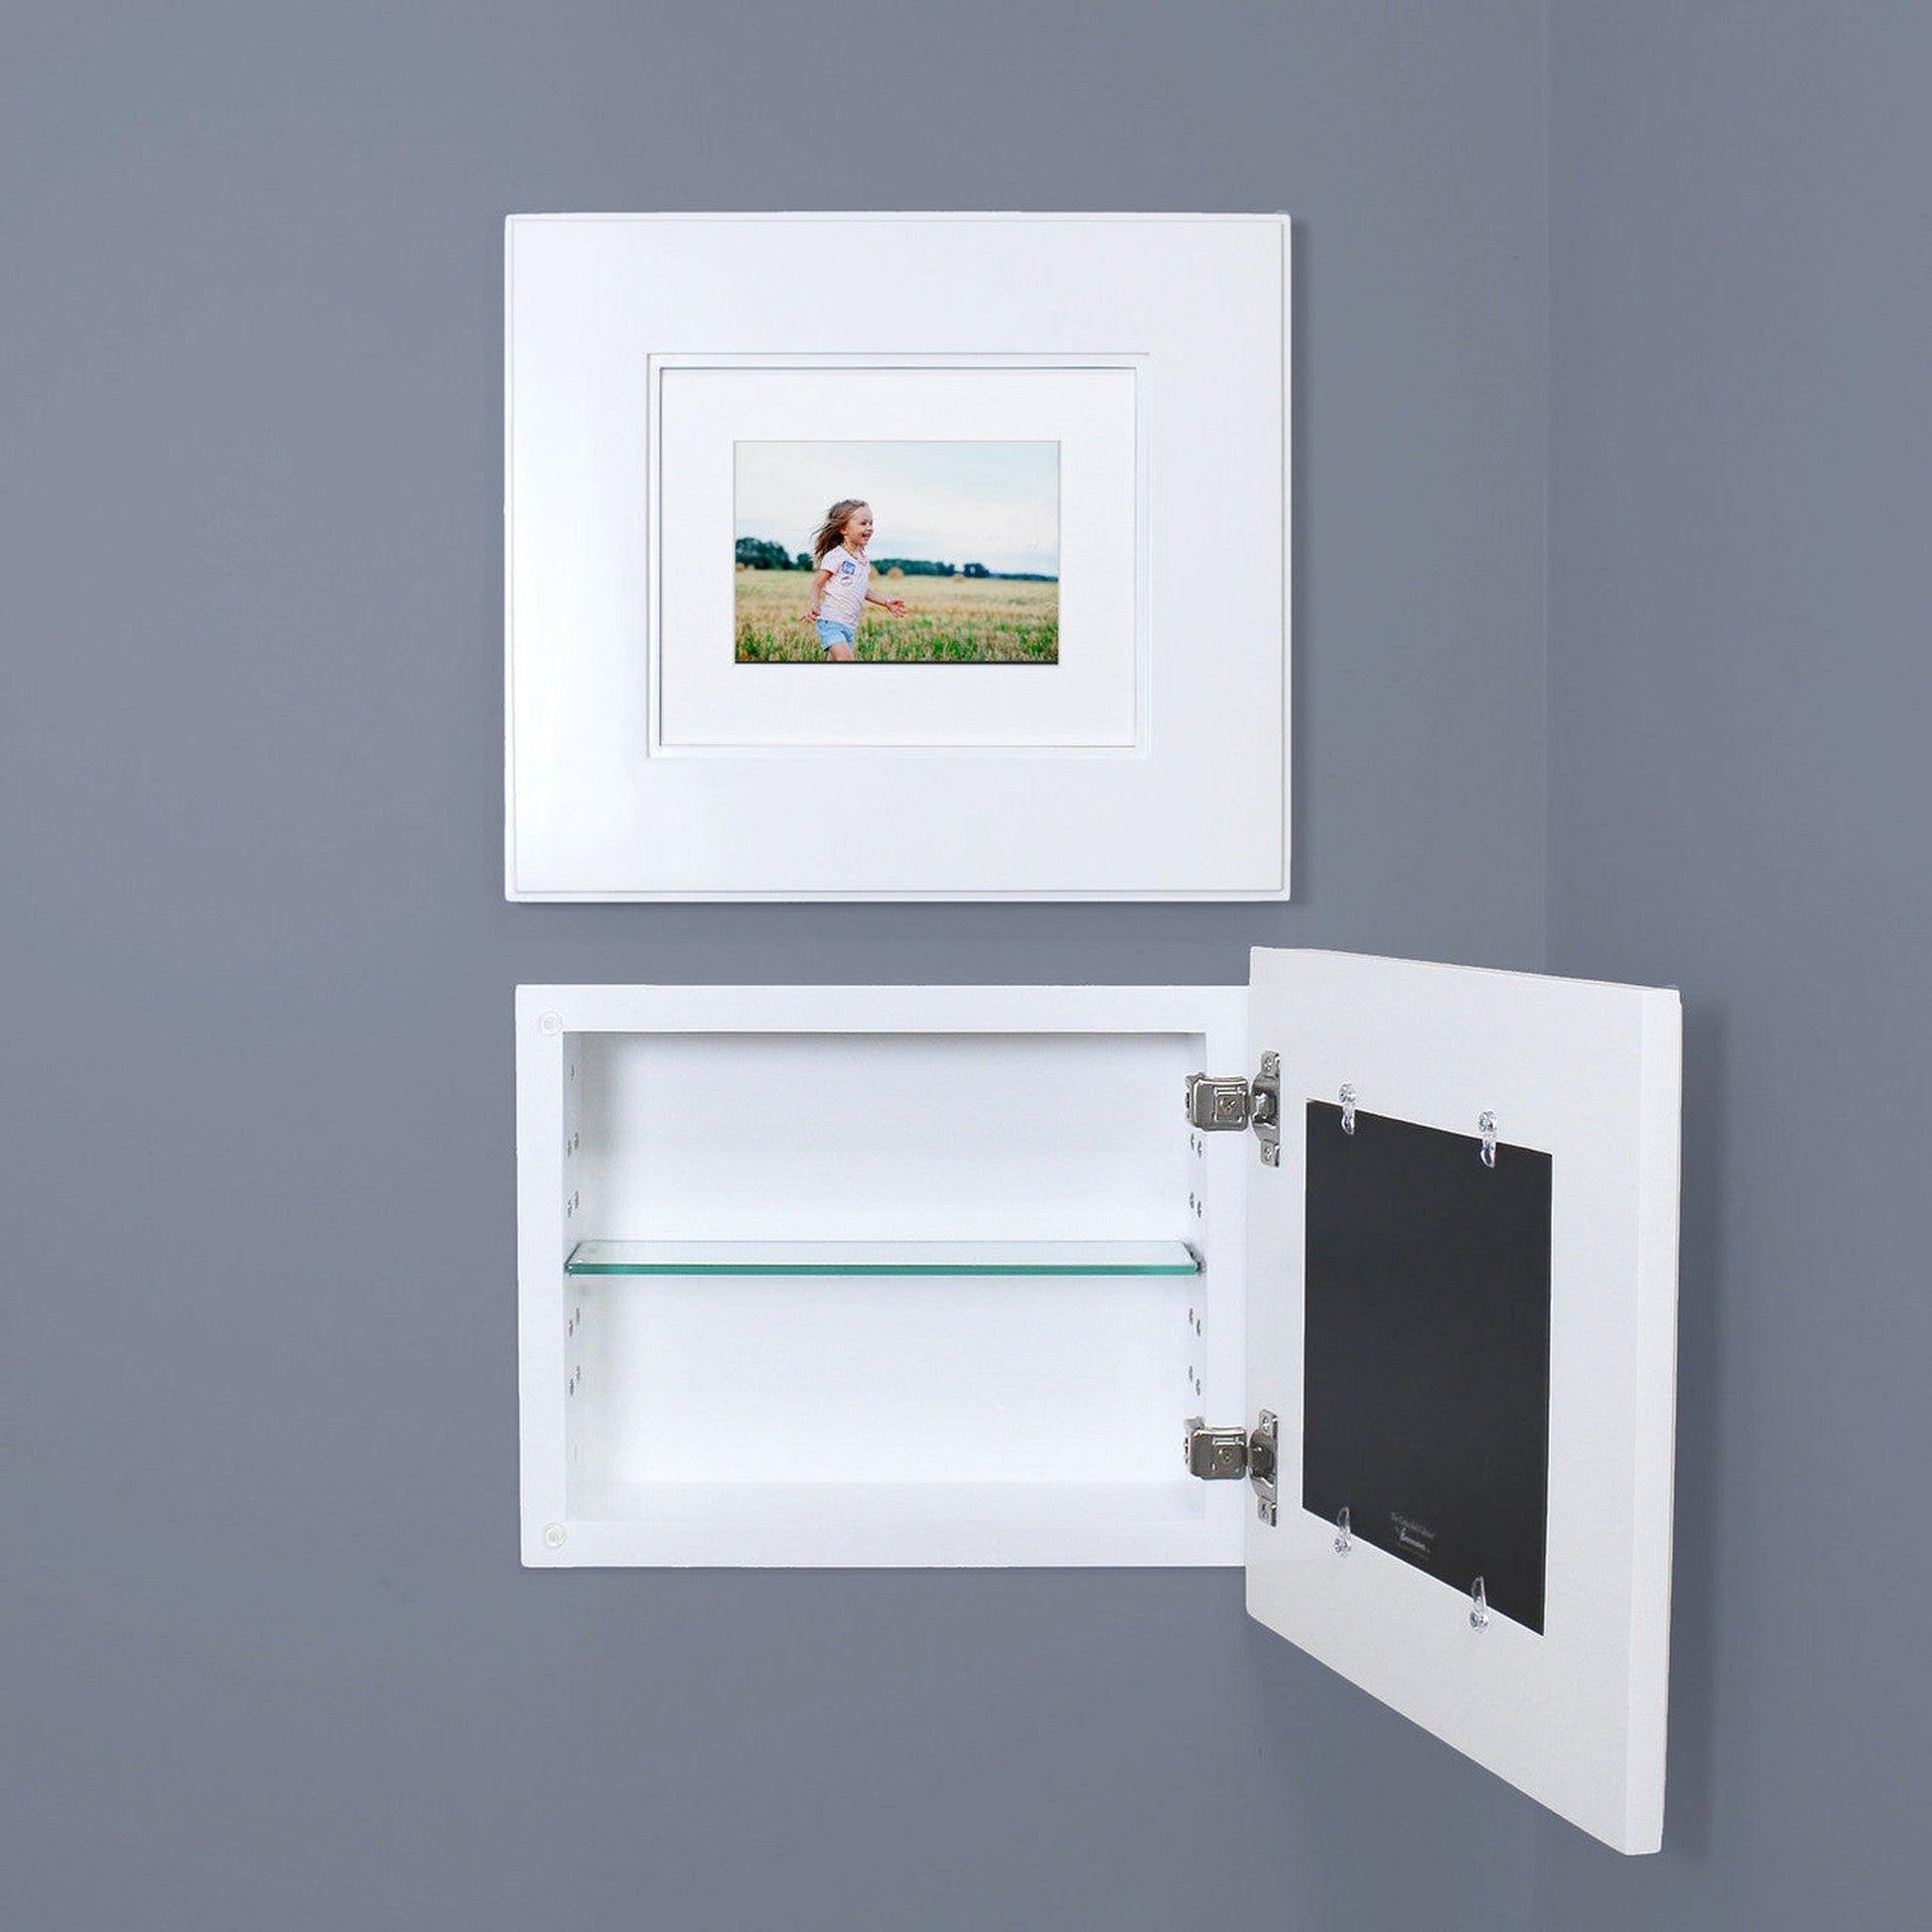 Fox Hollow Furnishings 14" x 11" White Compact Landscape Shaker Standard Depth Recessed Picture Frame Medicine Cabinet